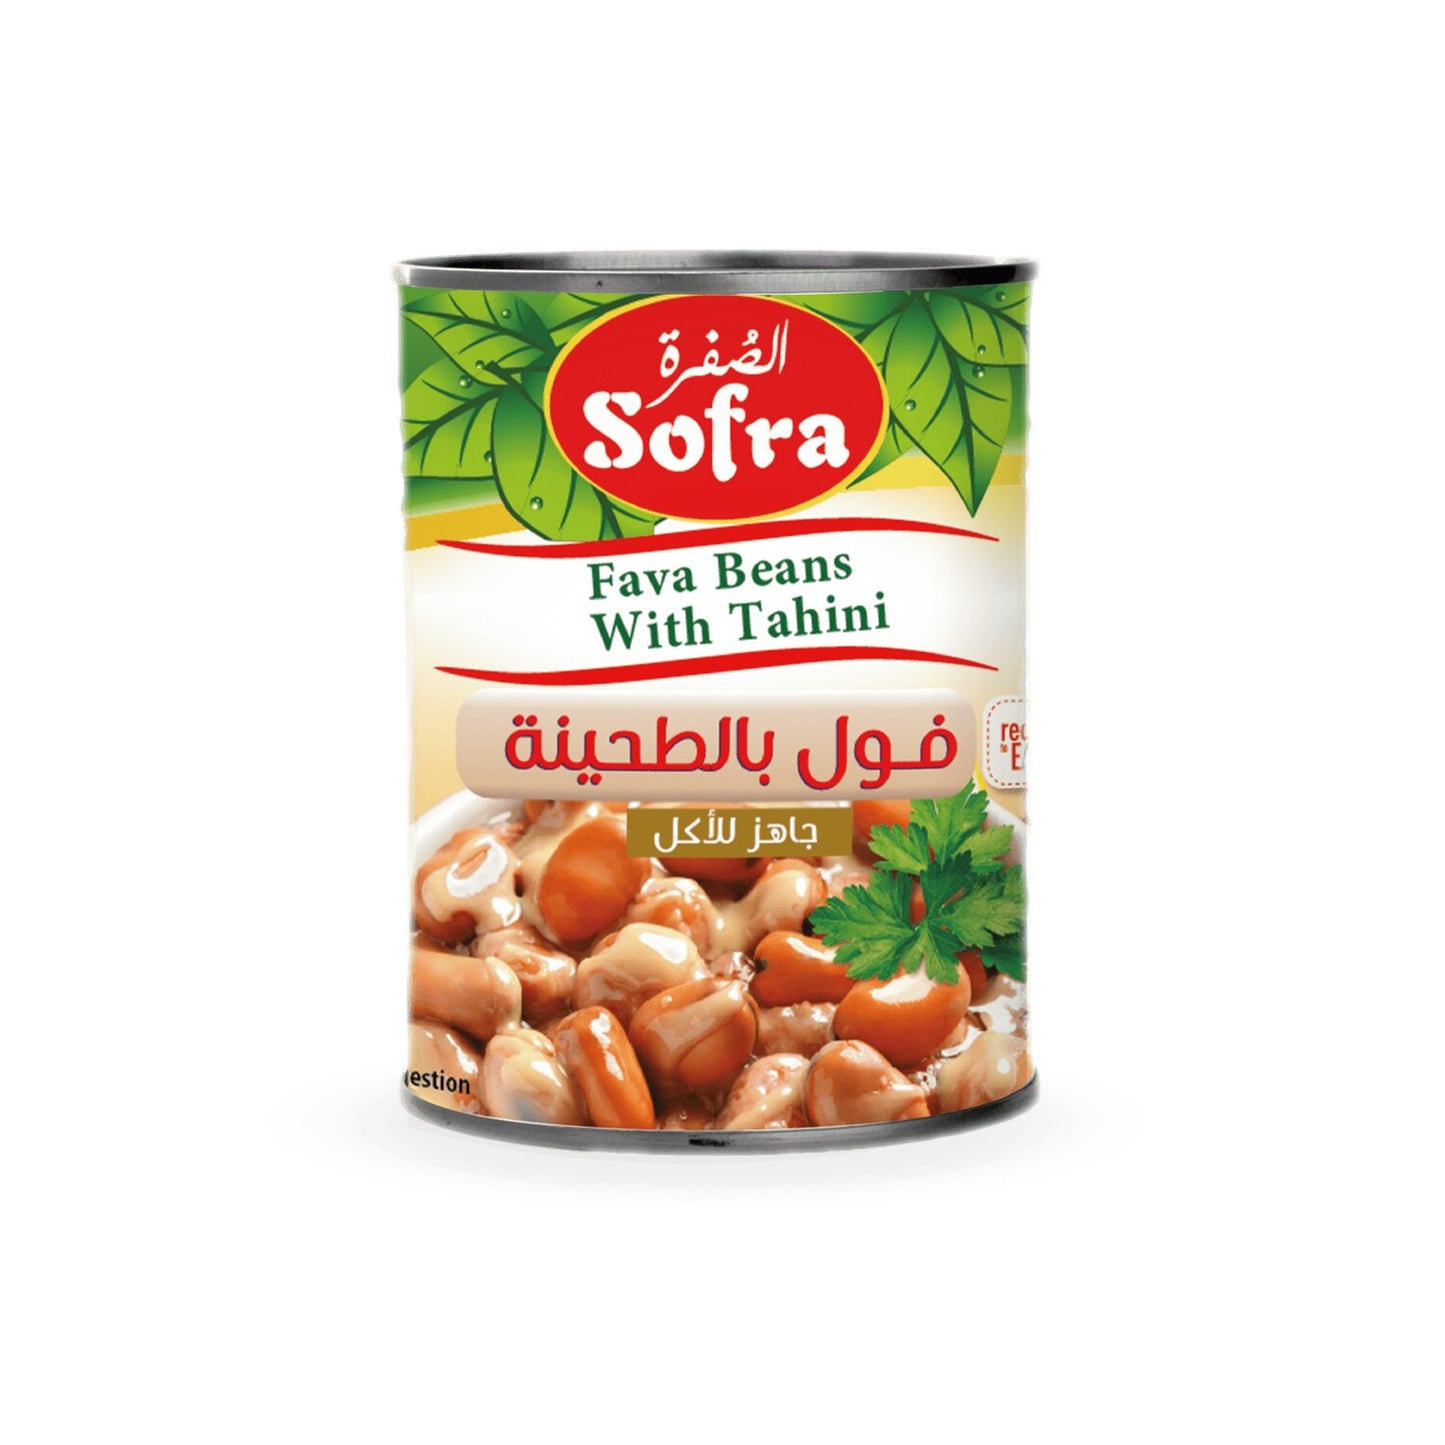 Offer Sofra Fava Beans With Tahini 400g X 2 pcs